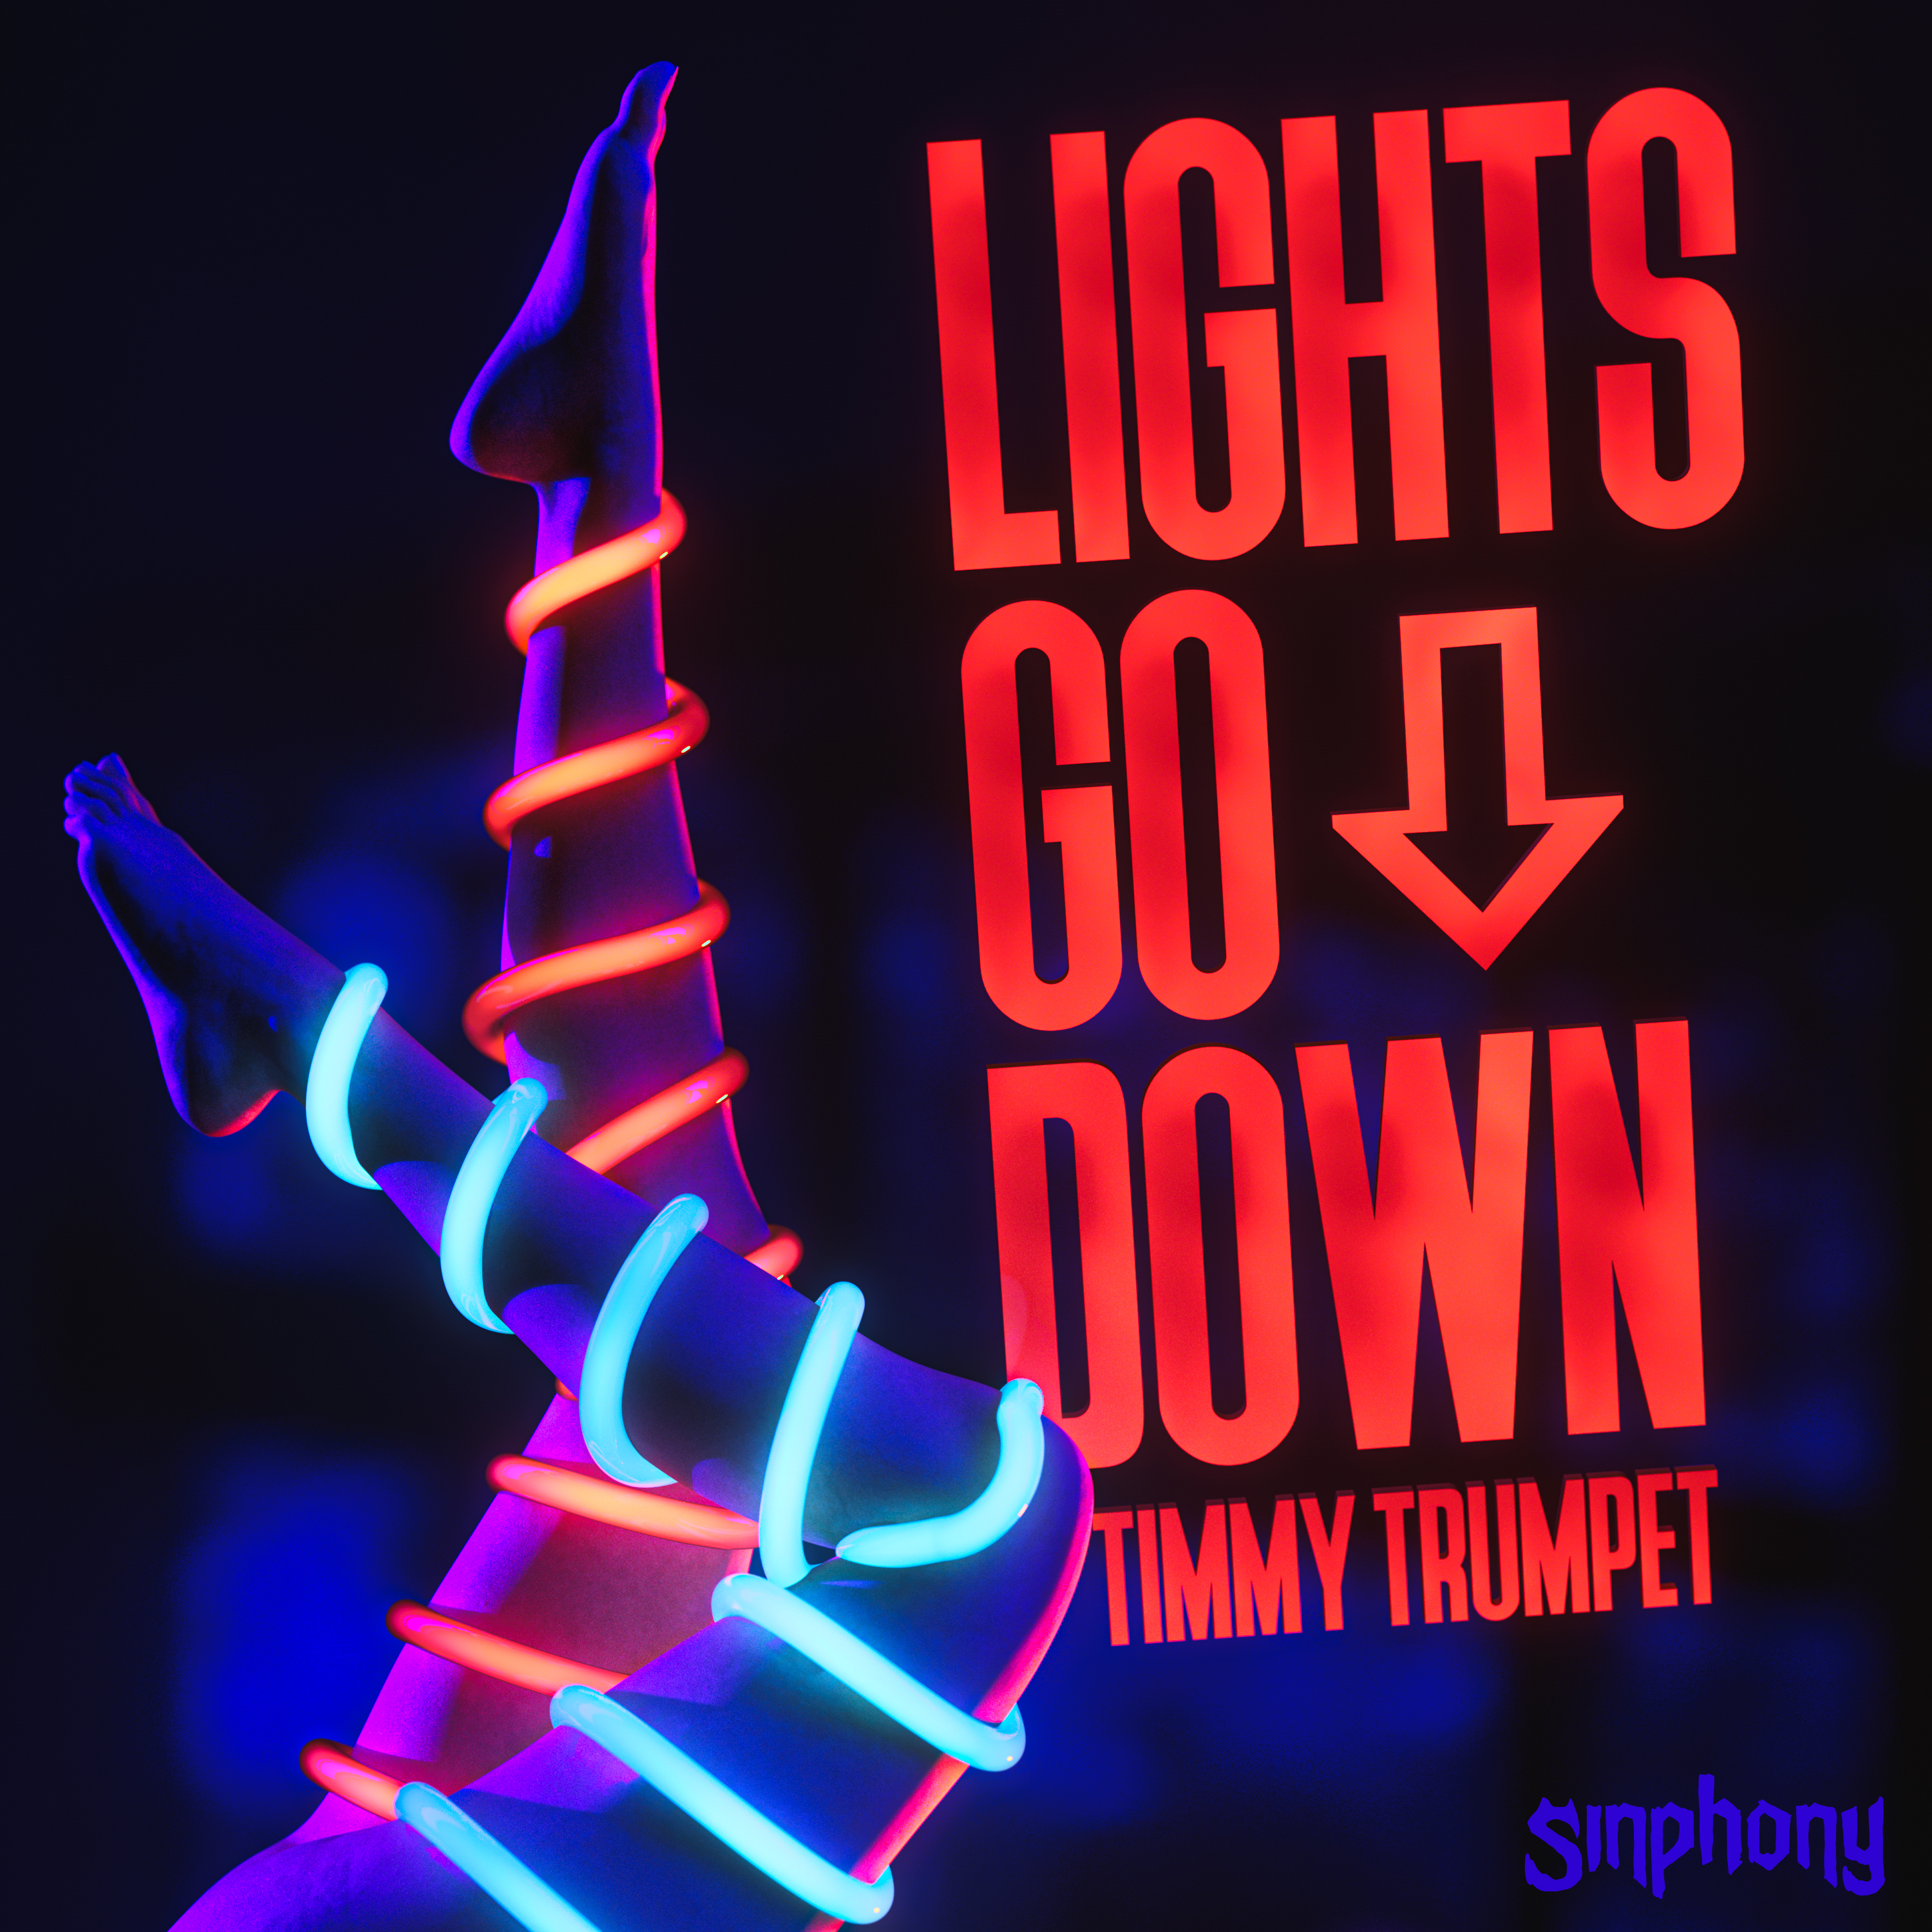 Timmy Trumpet Lights Go Down cover artwork